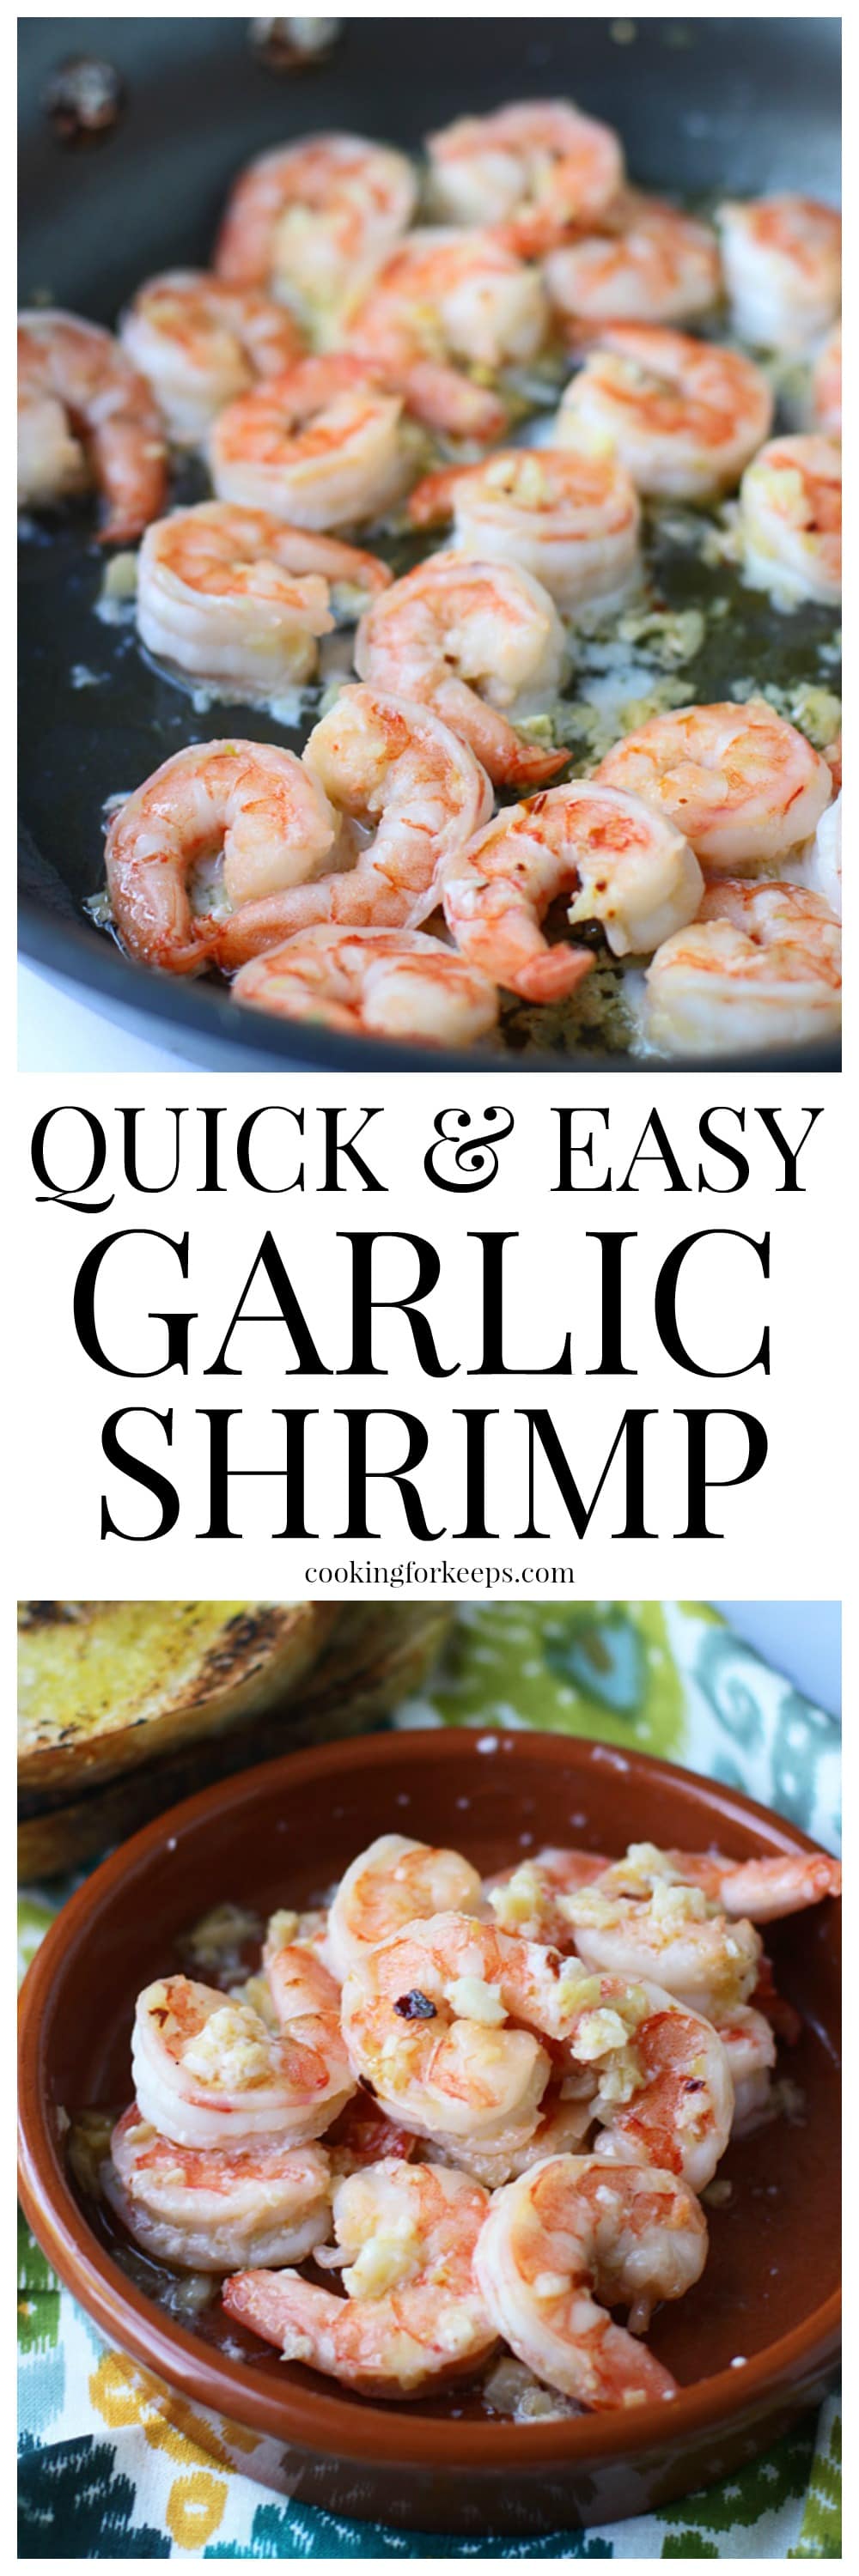 10 Minute Spicy Garlicky Shrimp with Charred Ciabatta